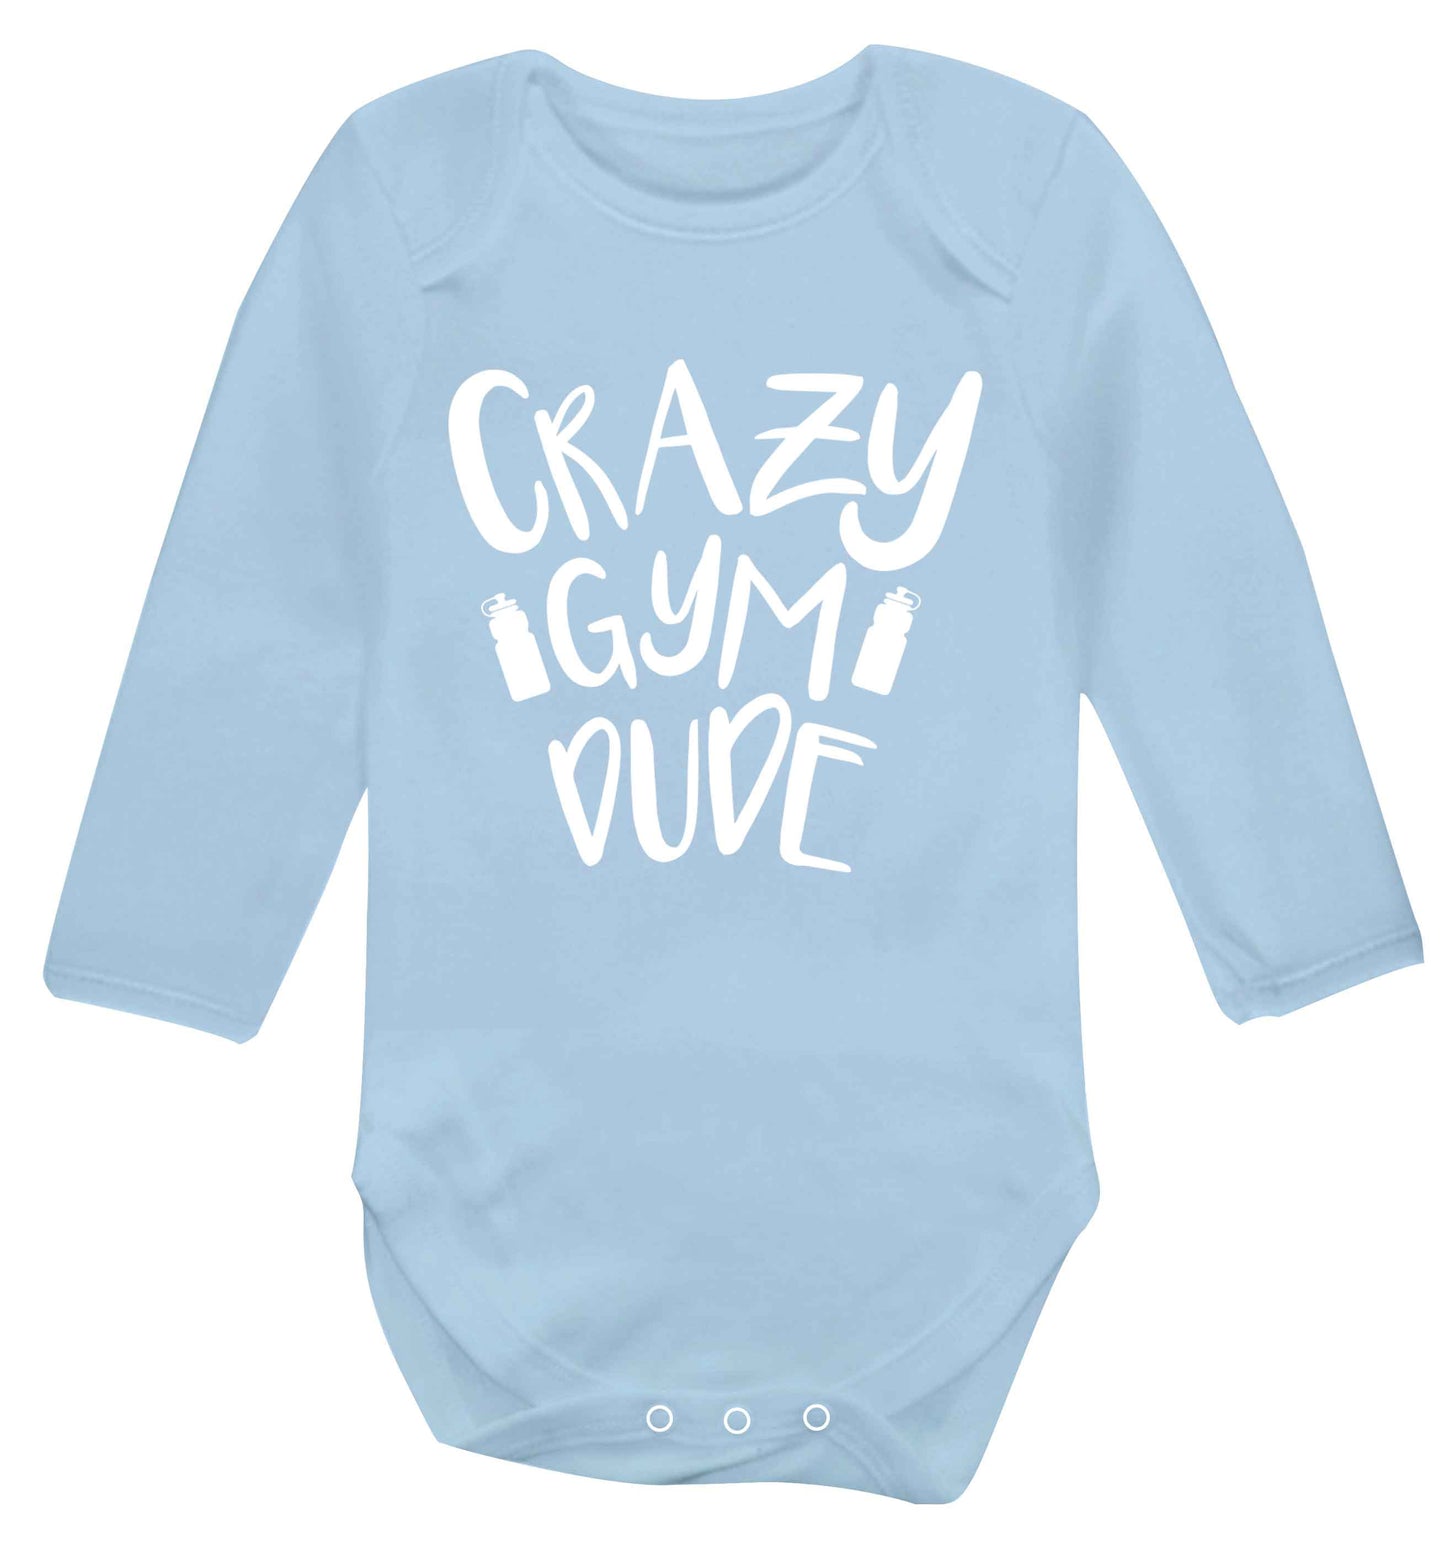 Crazy gym dude Baby Vest long sleeved pale blue 6-12 months